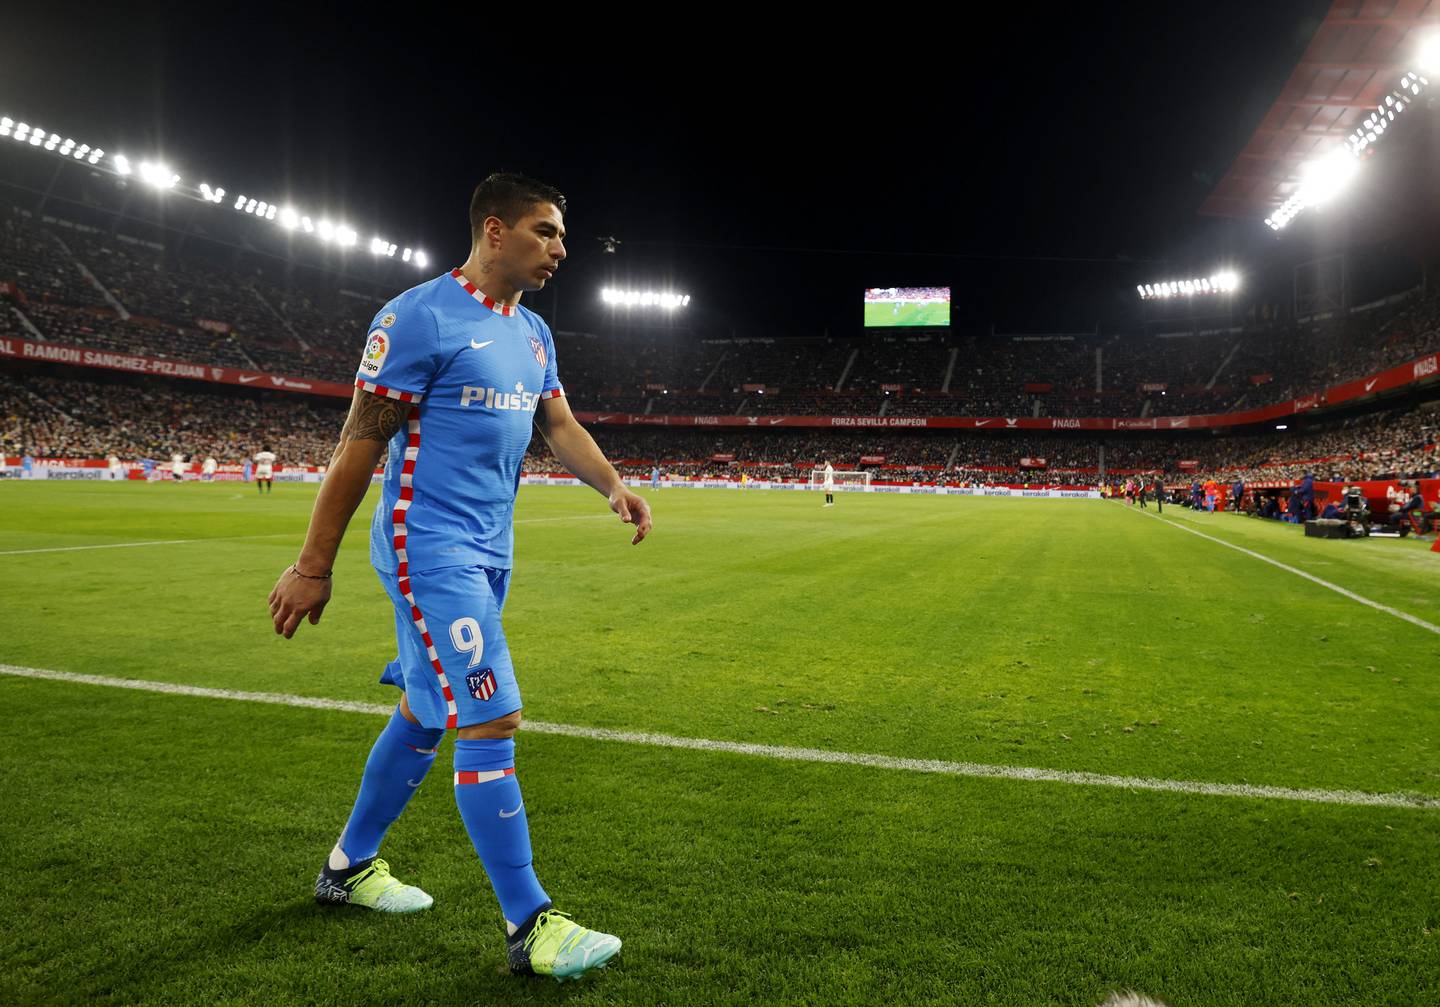 Luis Suarez, struggling for form and goals, was not happy at being substituted against Sevilla. Reuters